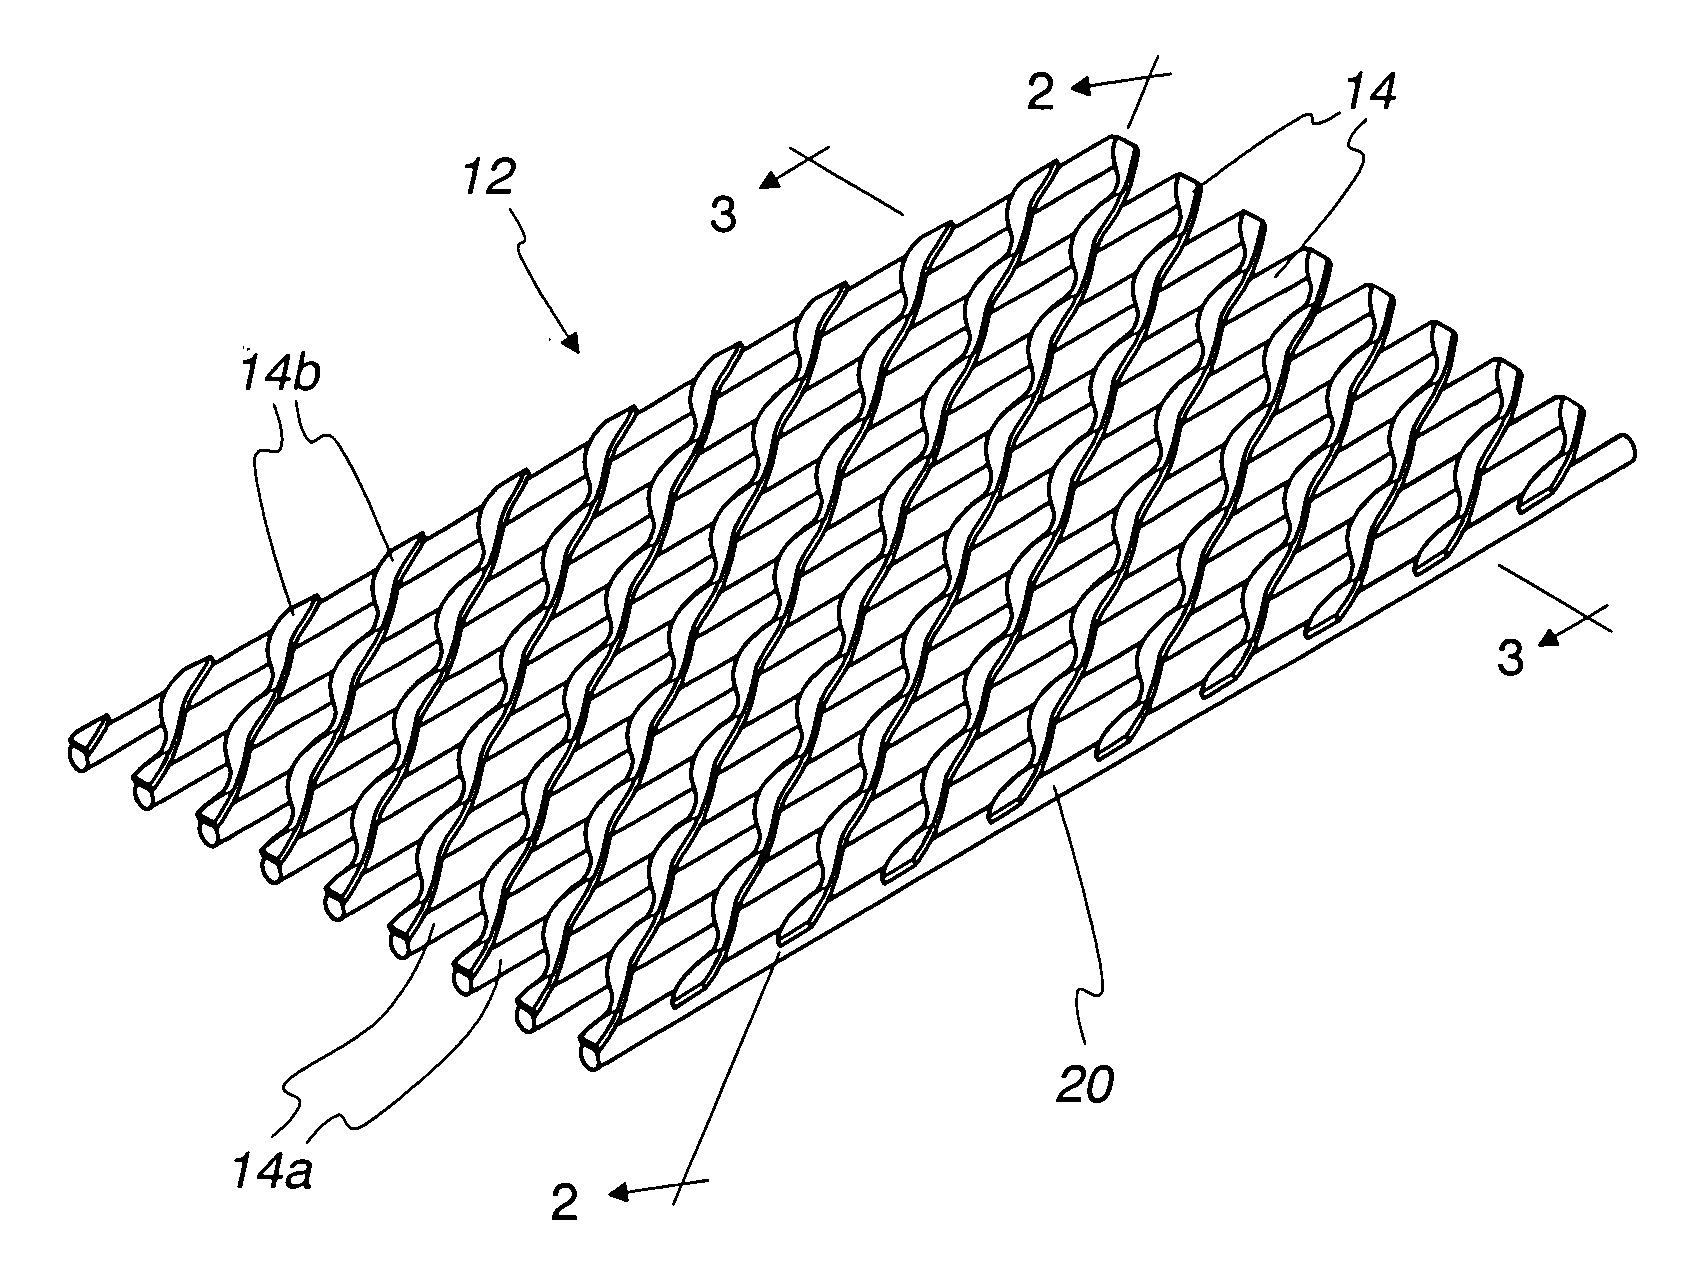 Geonet for a geocomposite